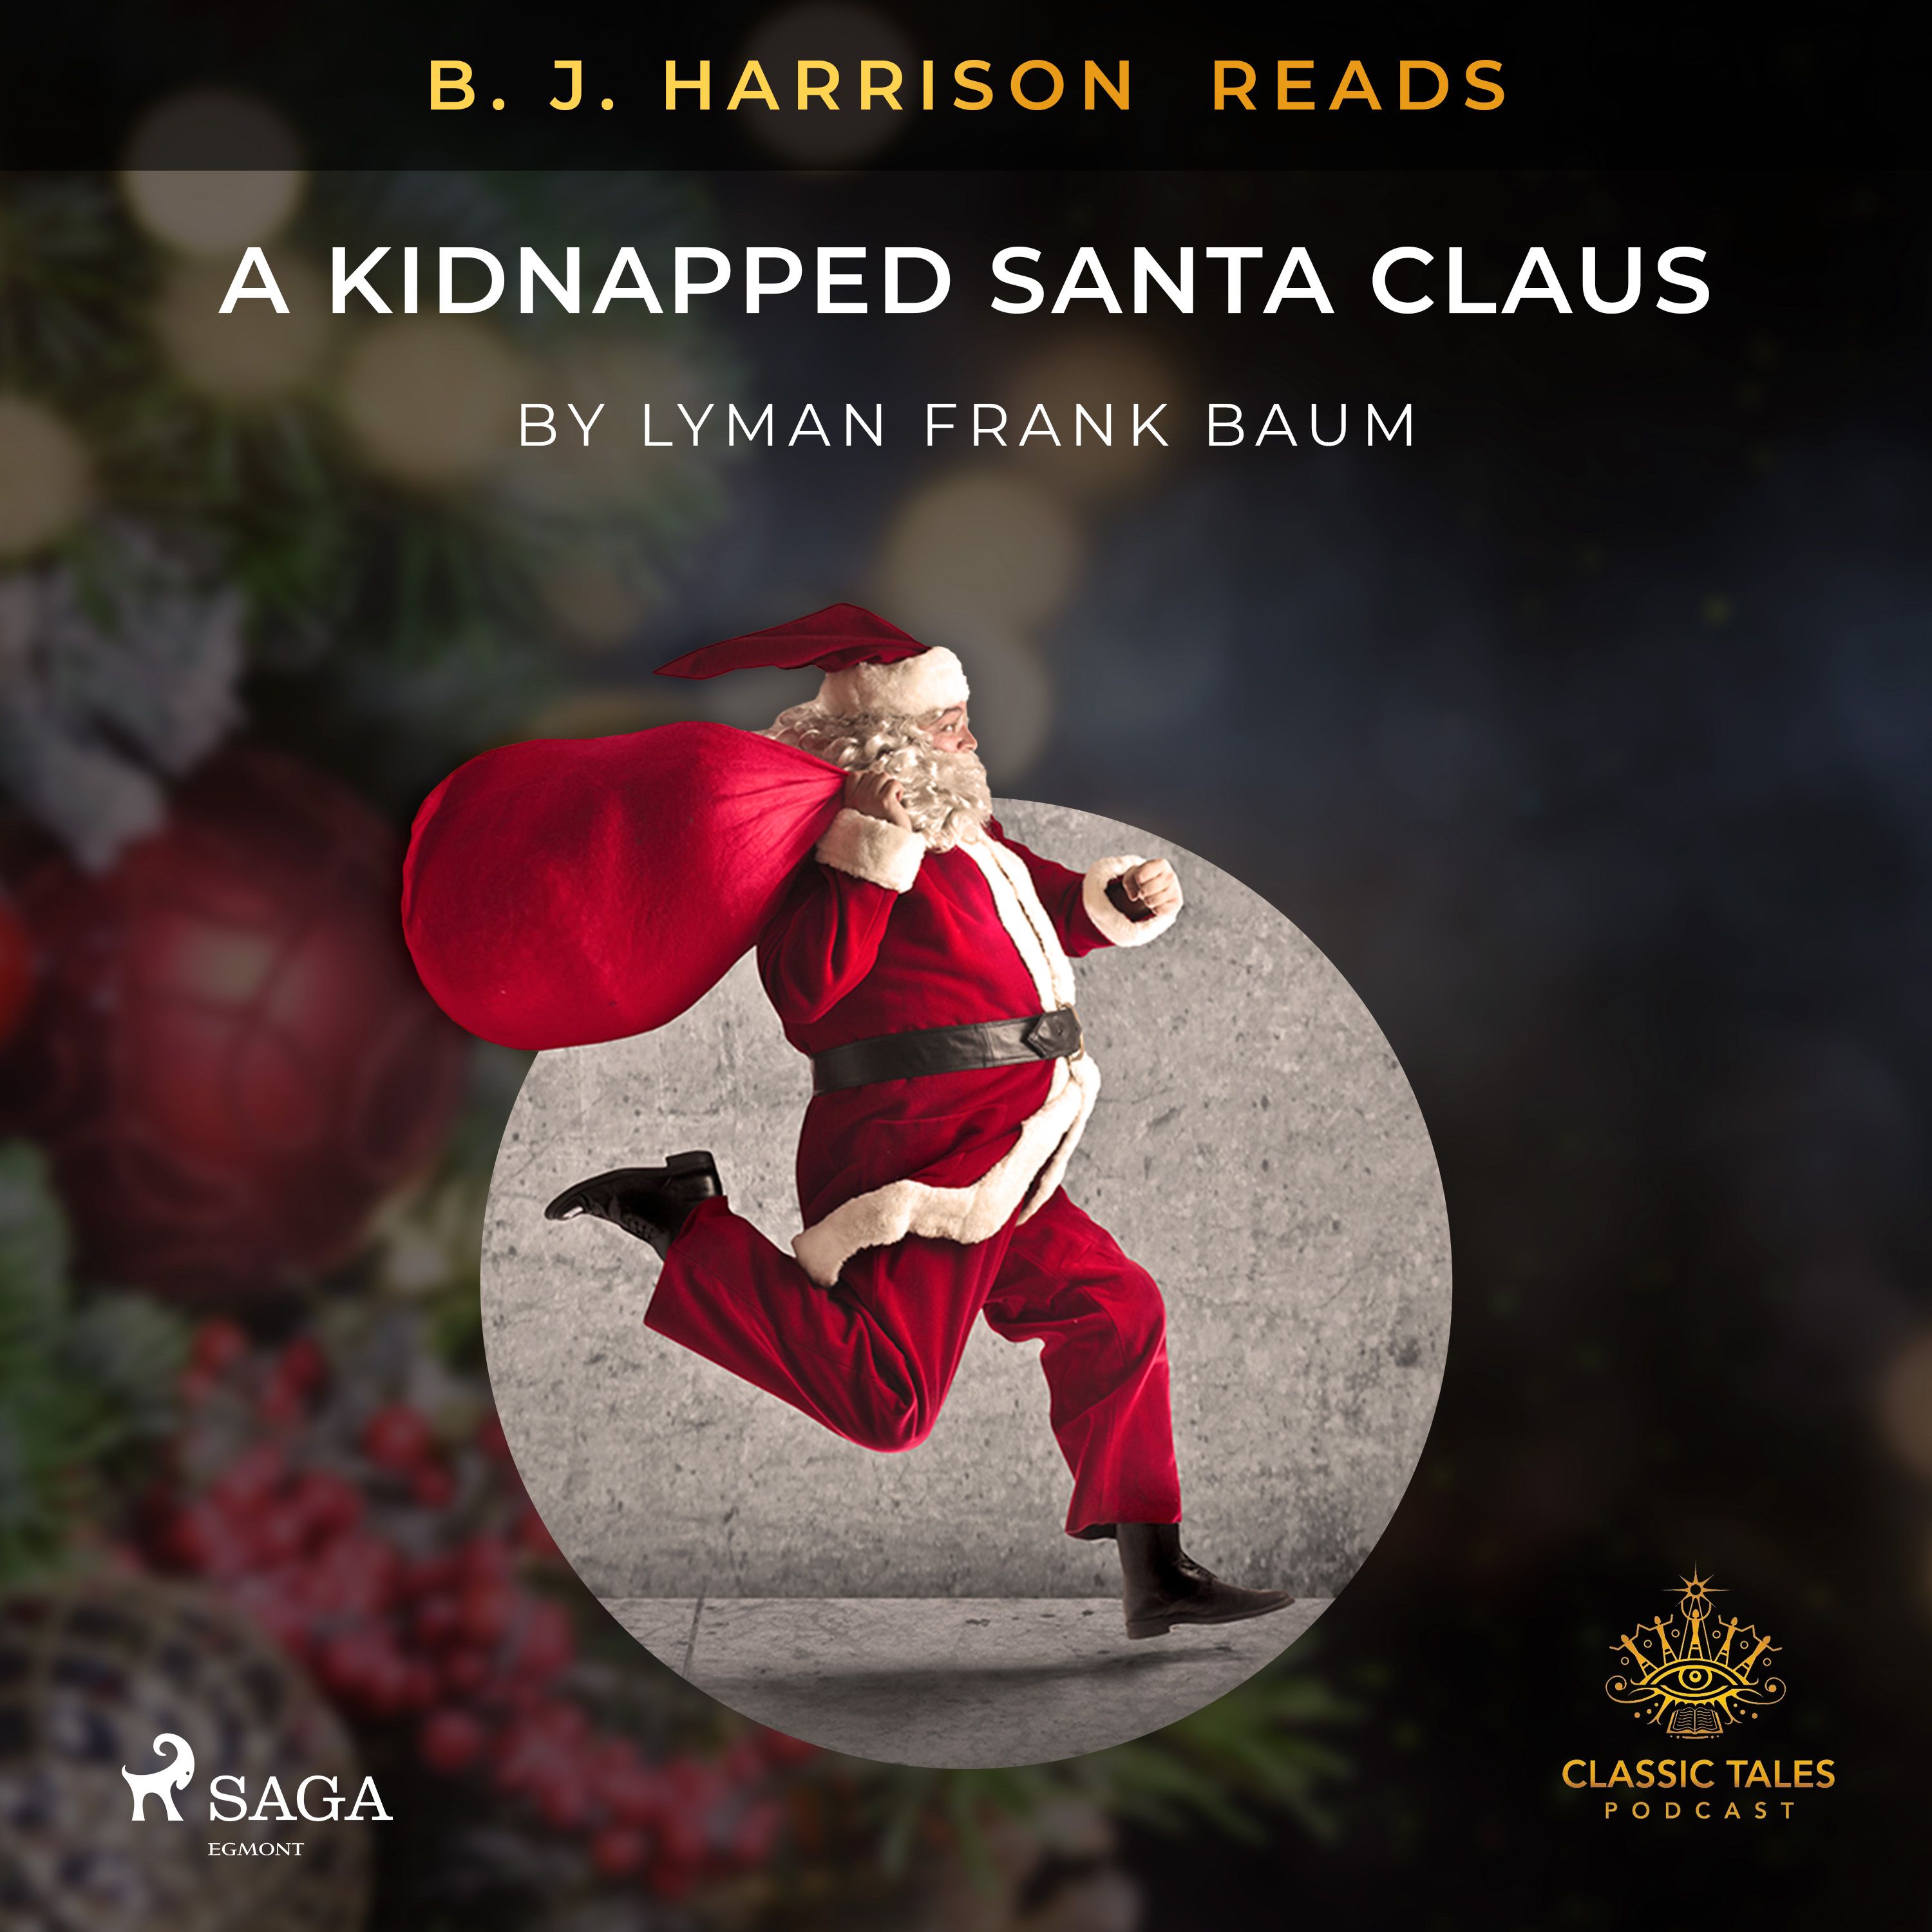 B. J. Harrison Reads A Kidnapped Santa Claus, audiobook by L. Frank. Baum